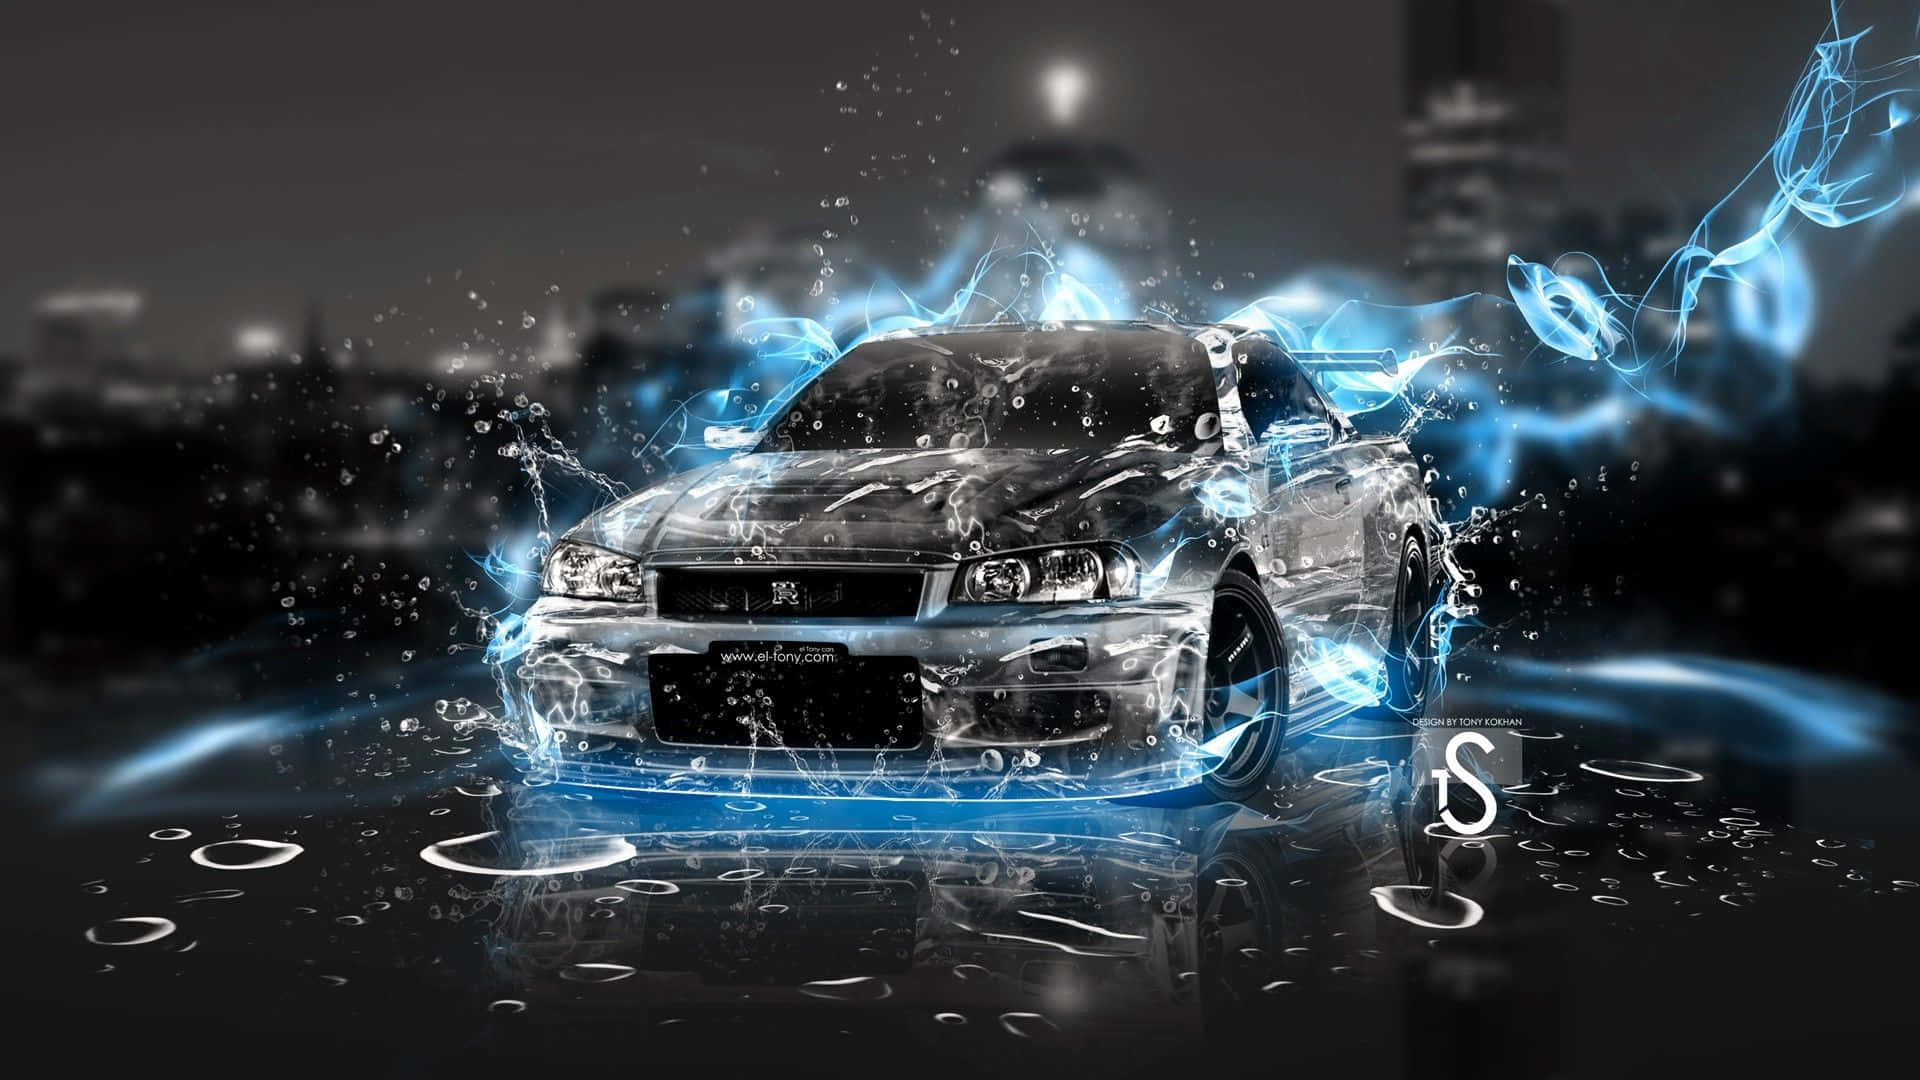 Get Ready To Take The Streets By Storm With This Cool GTR Wallpaper